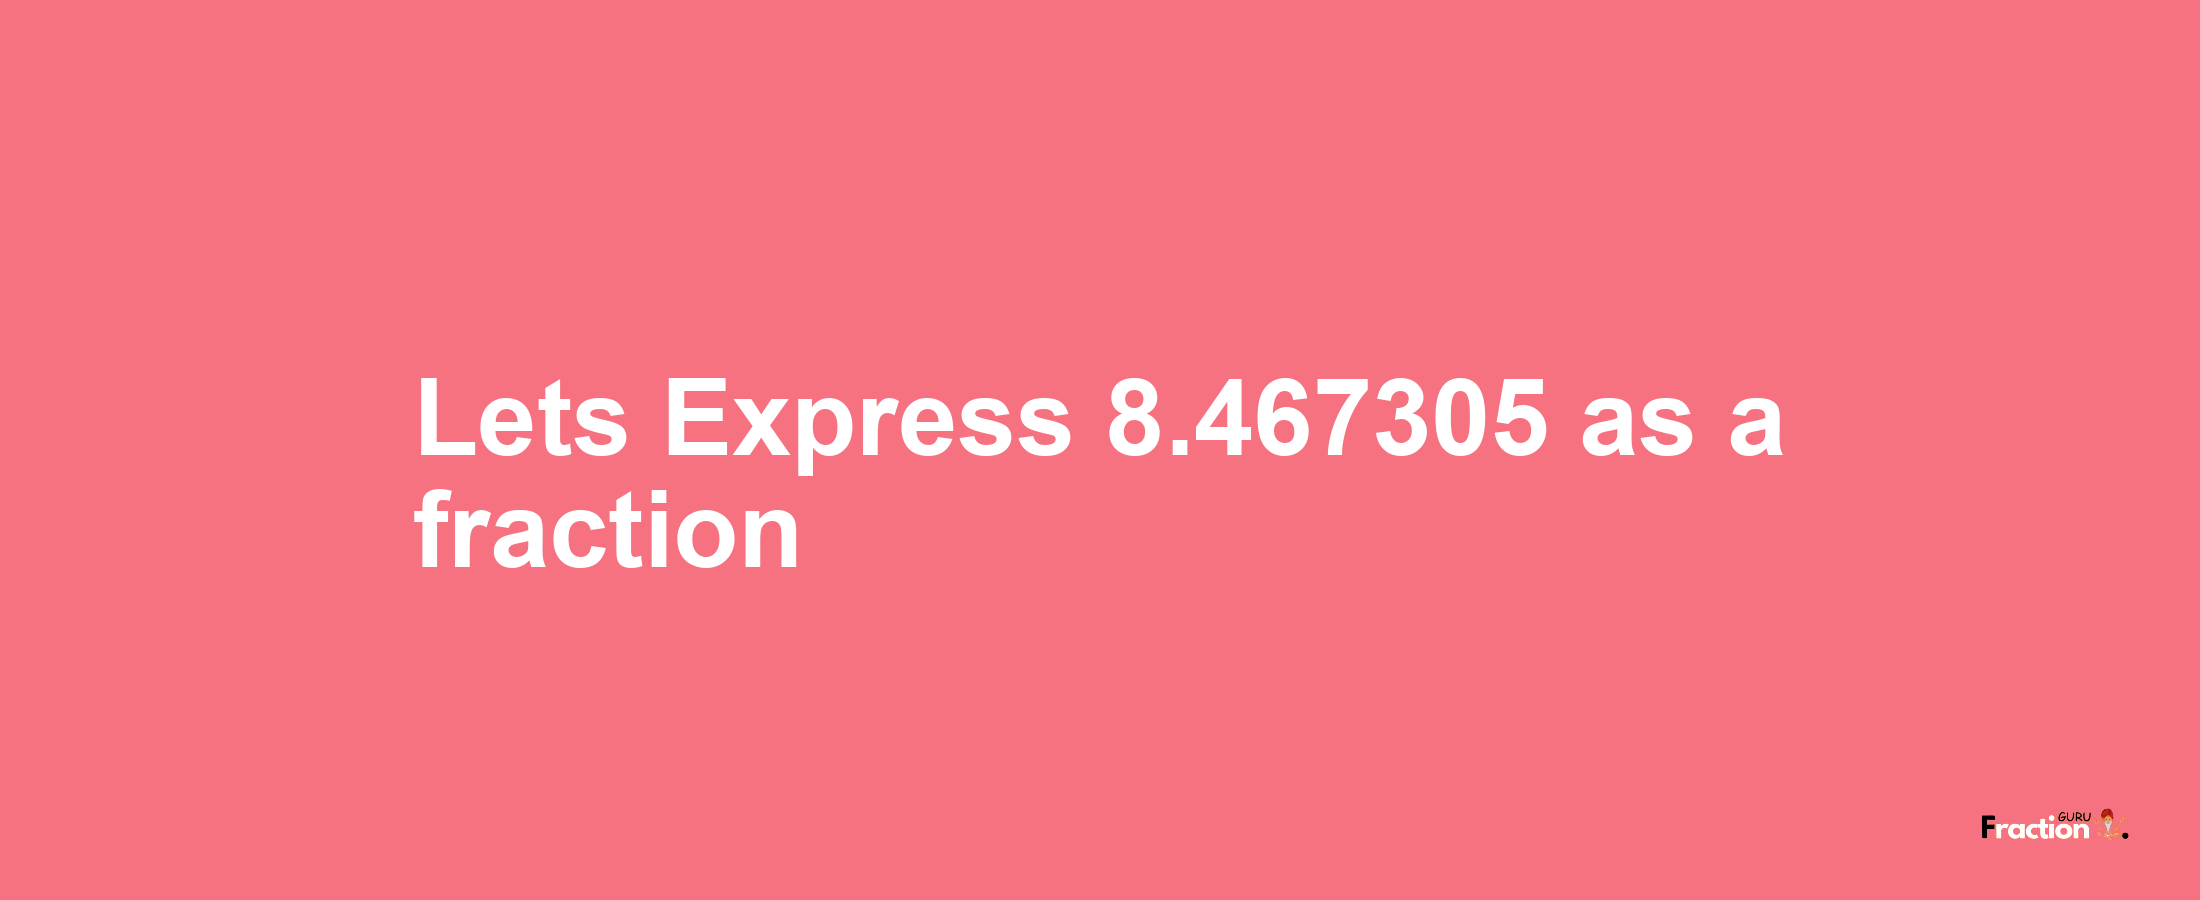 Lets Express 8.467305 as afraction